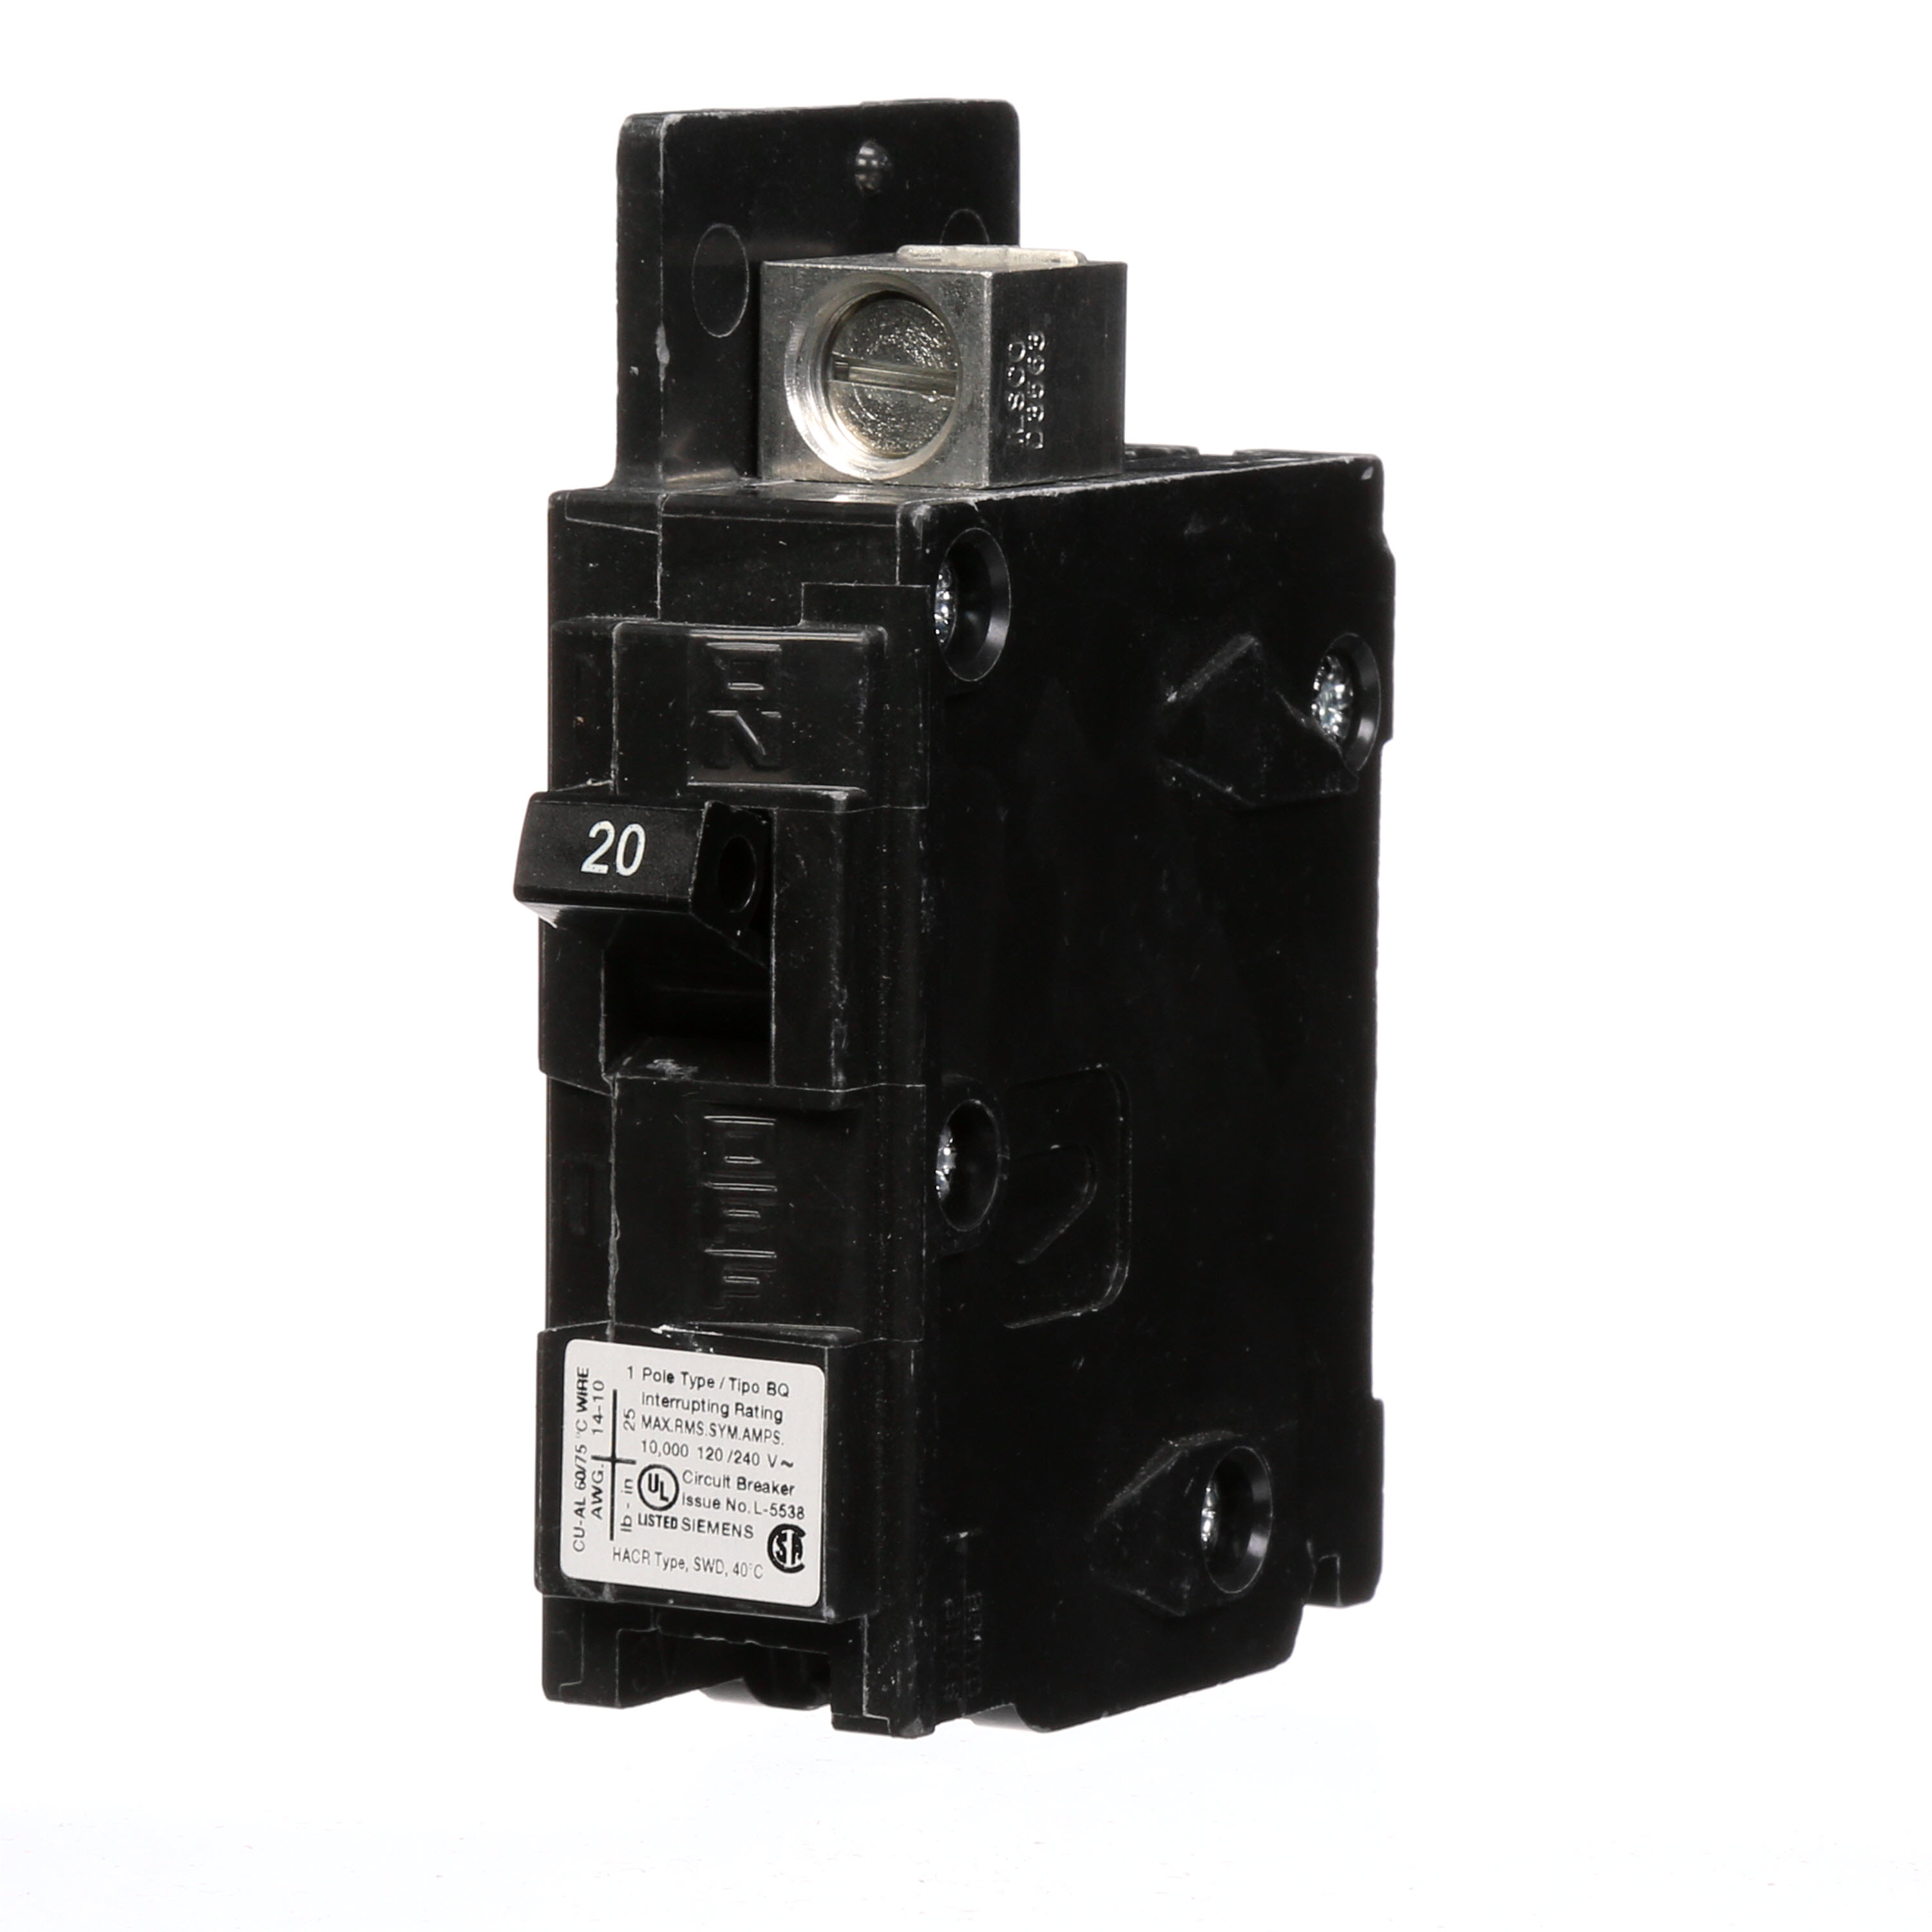 Siemens Low Voltage Molded Case Circuit Breakers General Purpose MCCBs are Circuit Protection Molded Case Circuit Breakers. 1-Pole circuit breaker type BQ. Rated 120V (020A) (AIR 10 kA). Special features line side lugs included. Note Load side lugs are included.